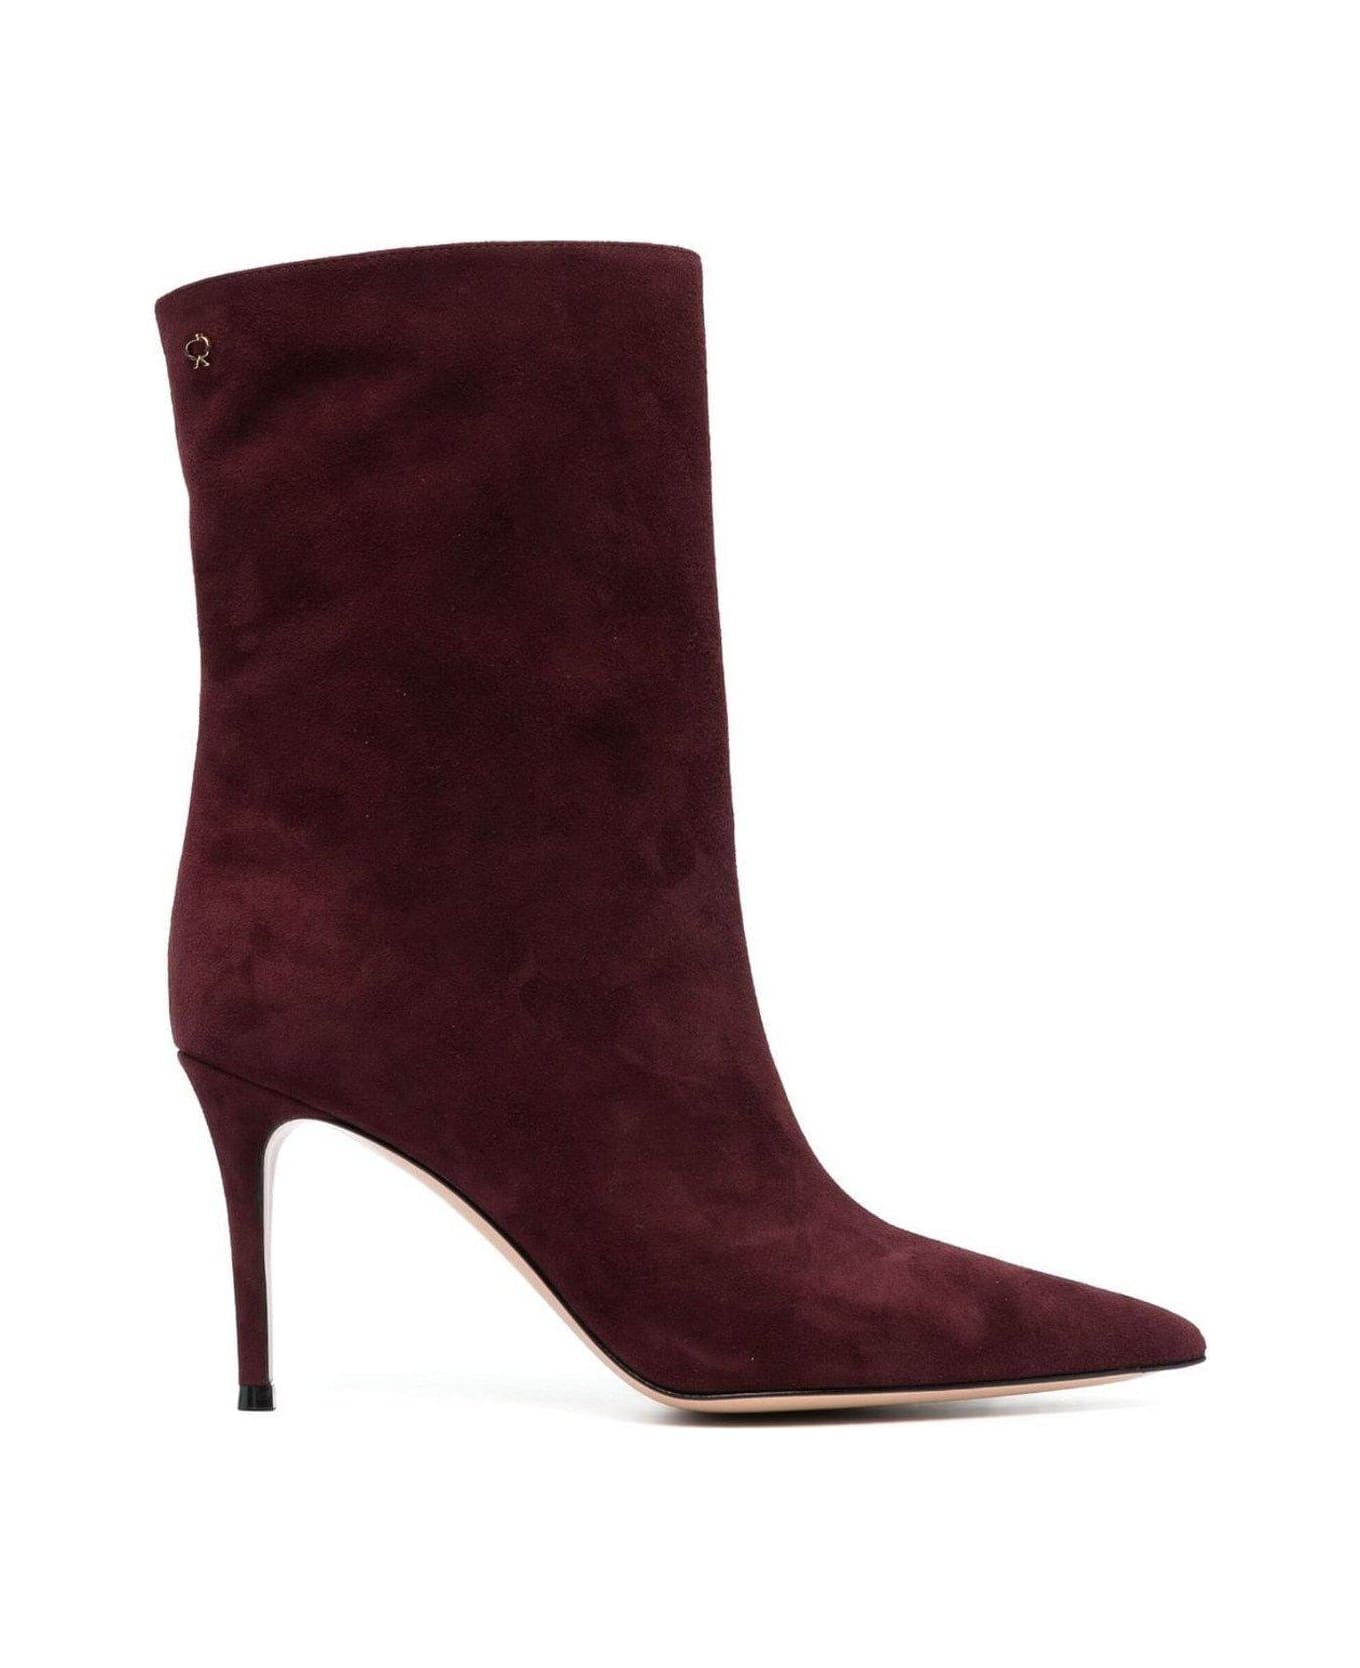 Gianvito Rossi Pointed-toe Ankle Boots - Red